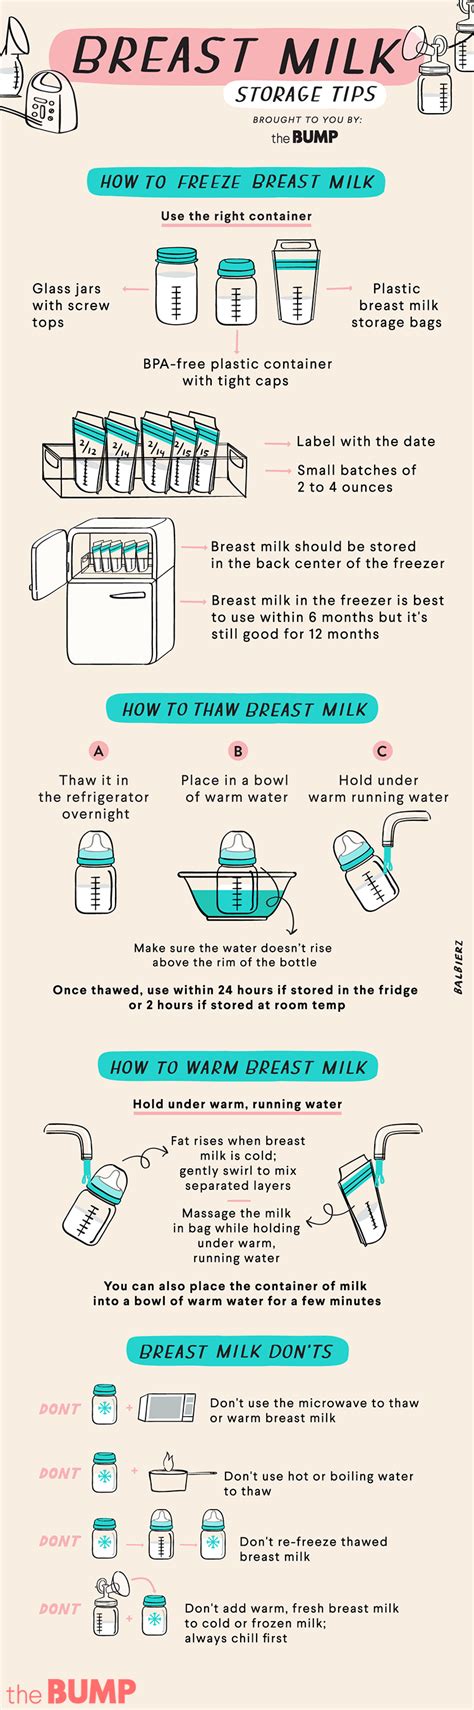 How To Warm Frozen Breast Milk In Bag Clearance Price Save 44